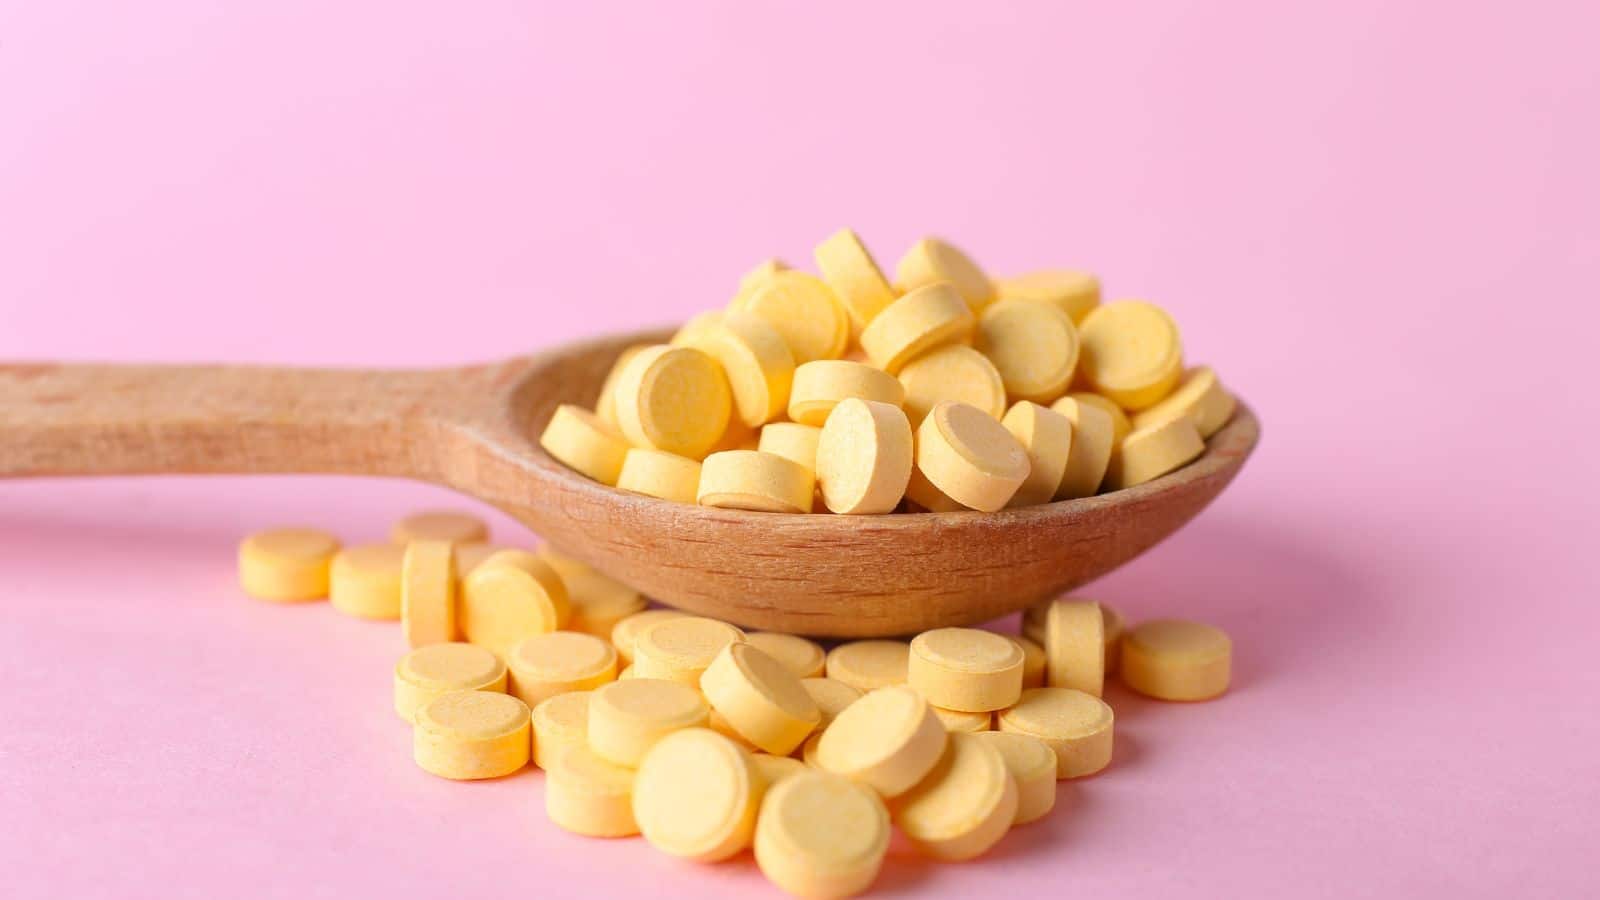 Pile of vitamins on a wooden spoon against a pink background.
